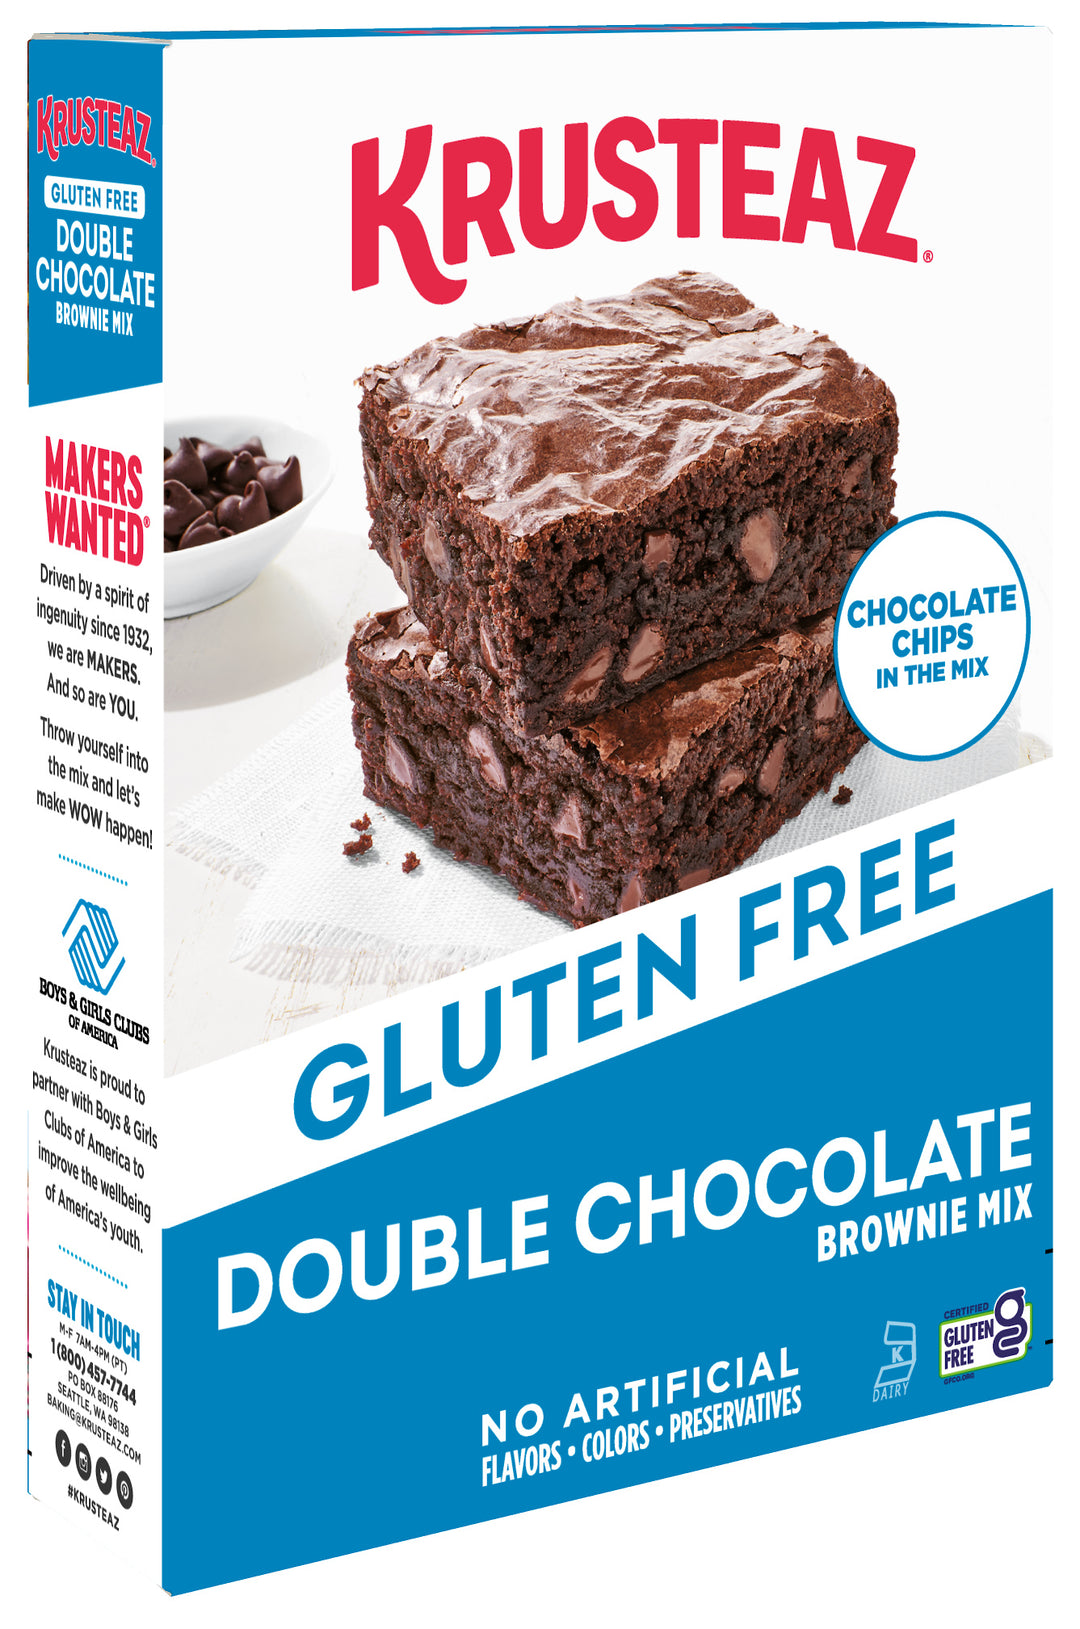 Krusteaz Gluten Free Double Chocolate Thick & Chewy Brownie Mix-20 oz.-8/Case